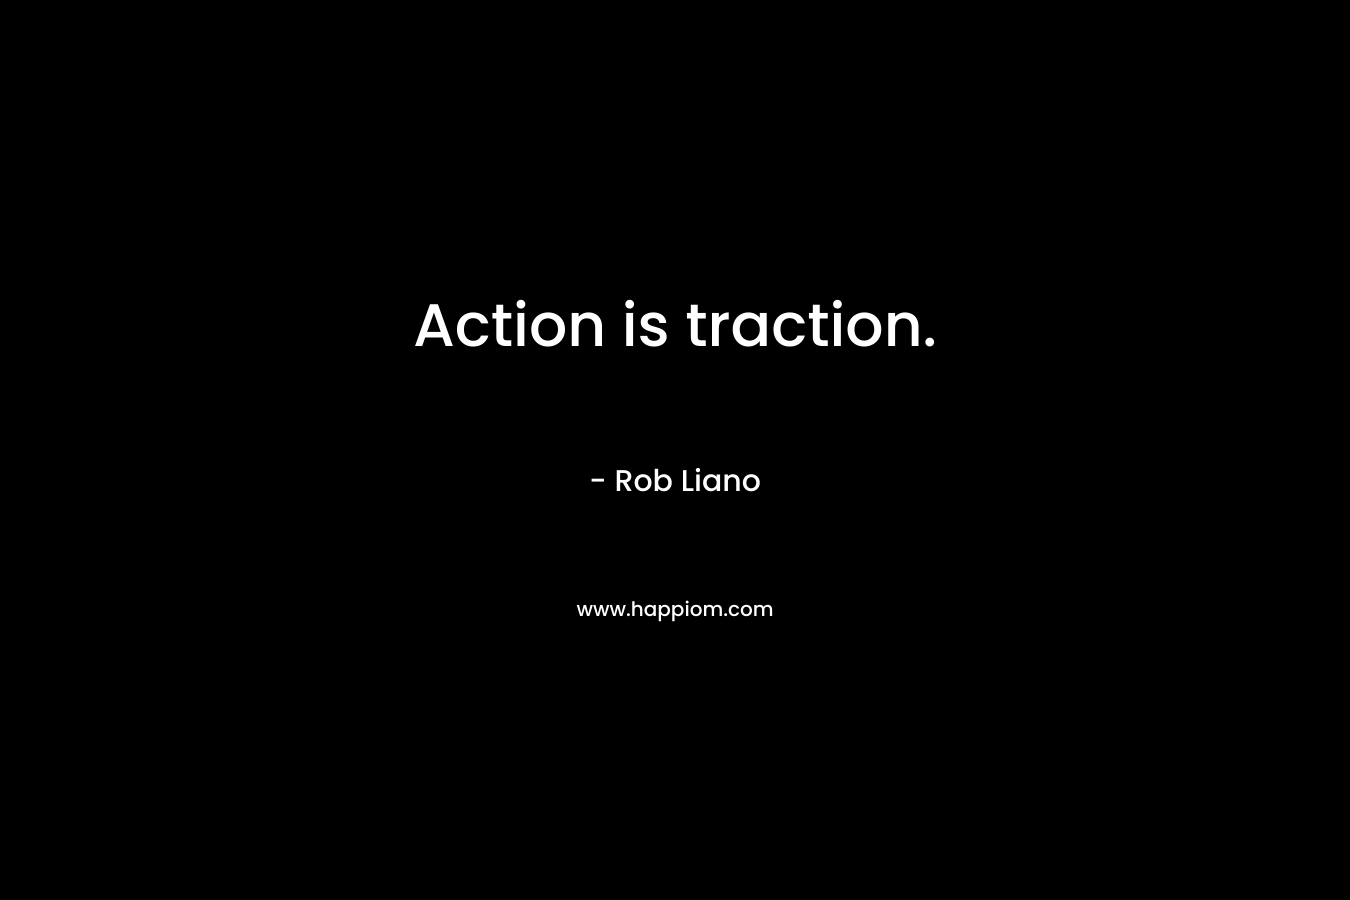 Action is traction.